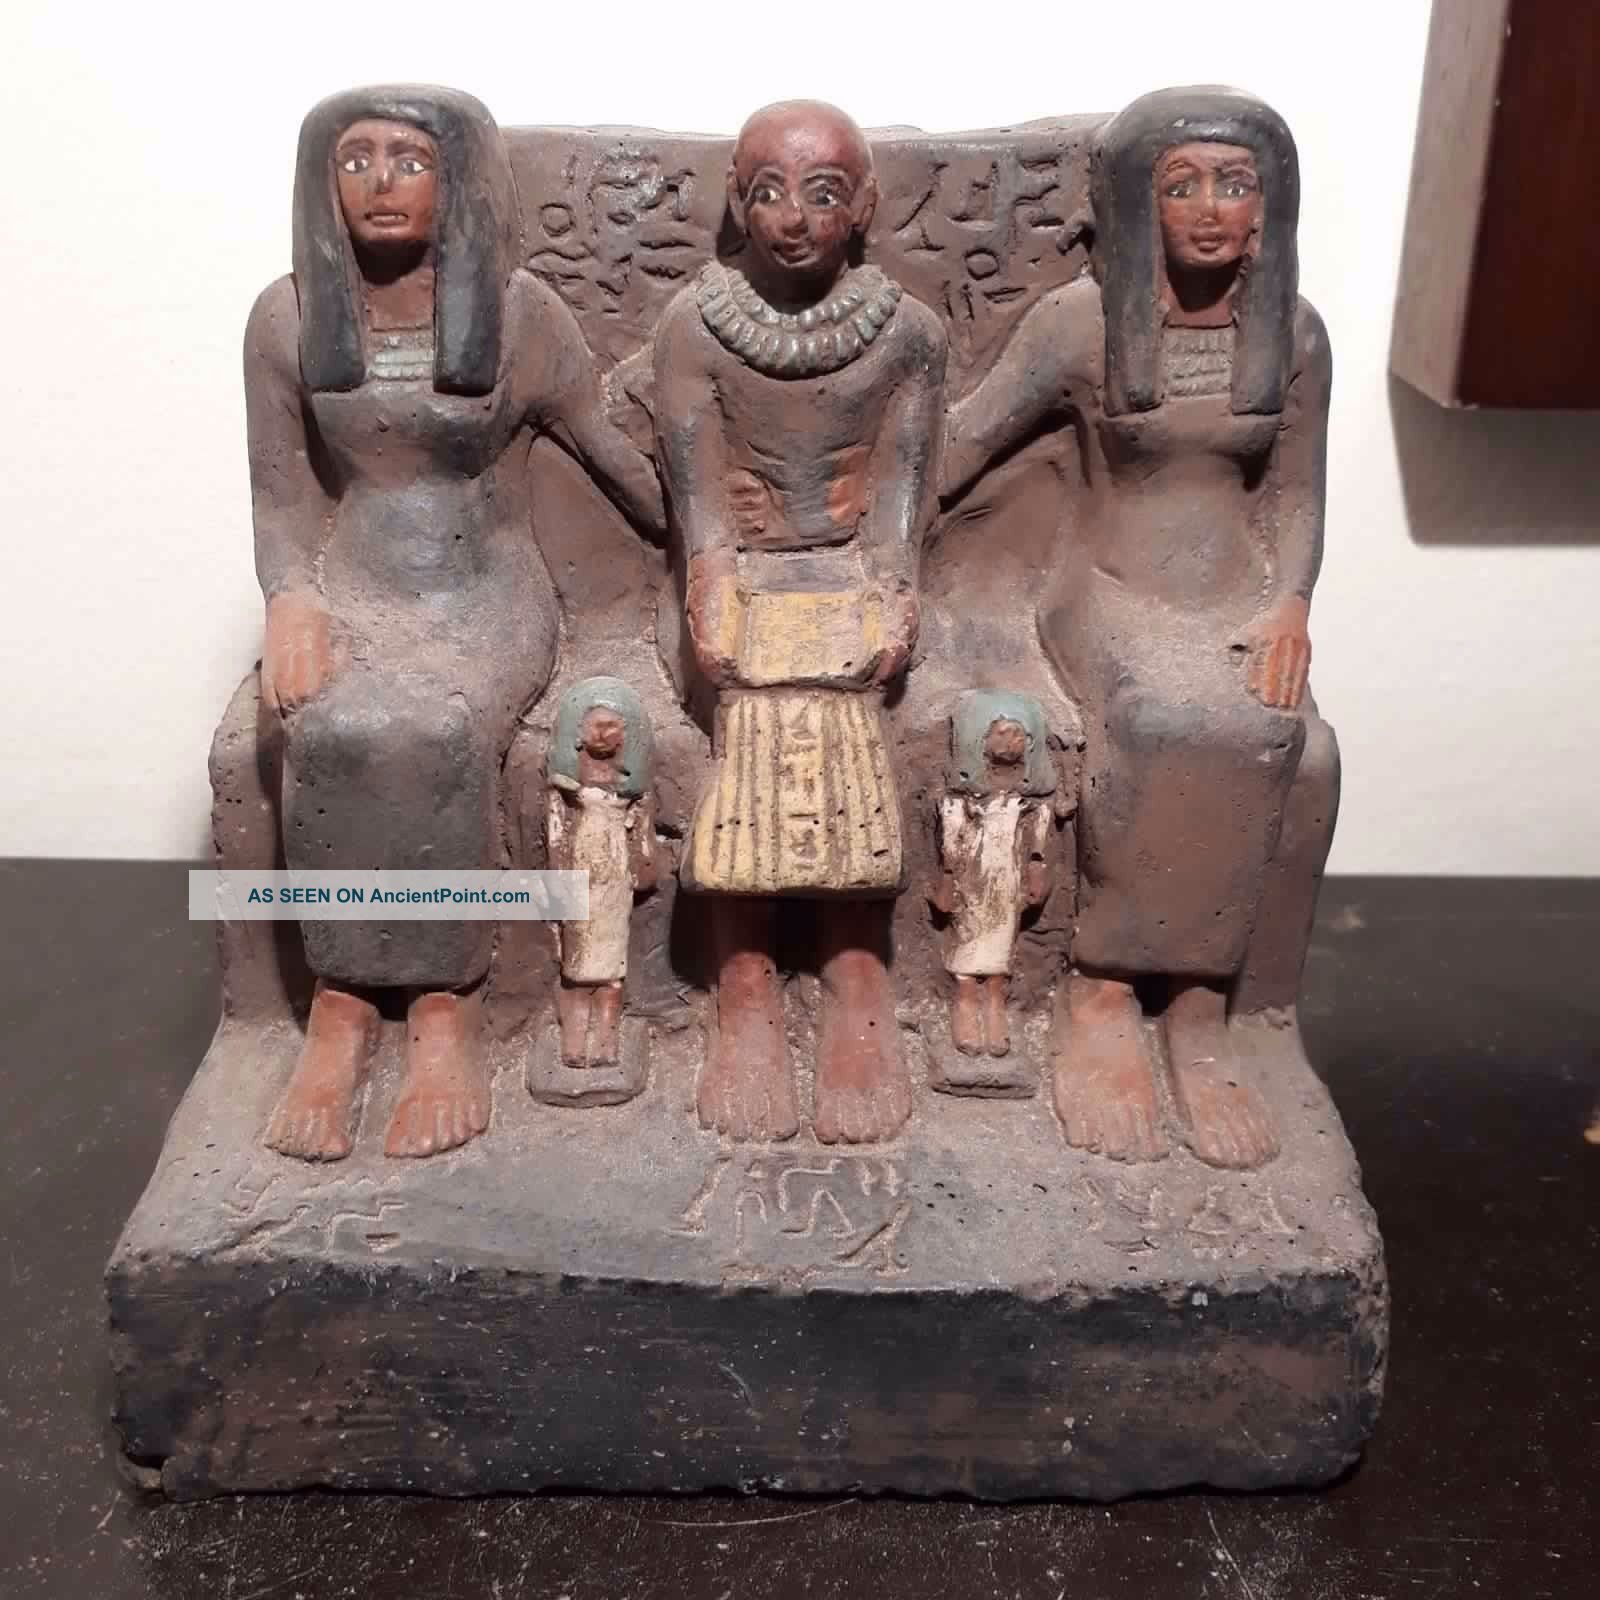 Rare Antique Ancient Egyptian Statue Architect Imhotep Build Pyramid2686 - 2649bc Egyptian photo